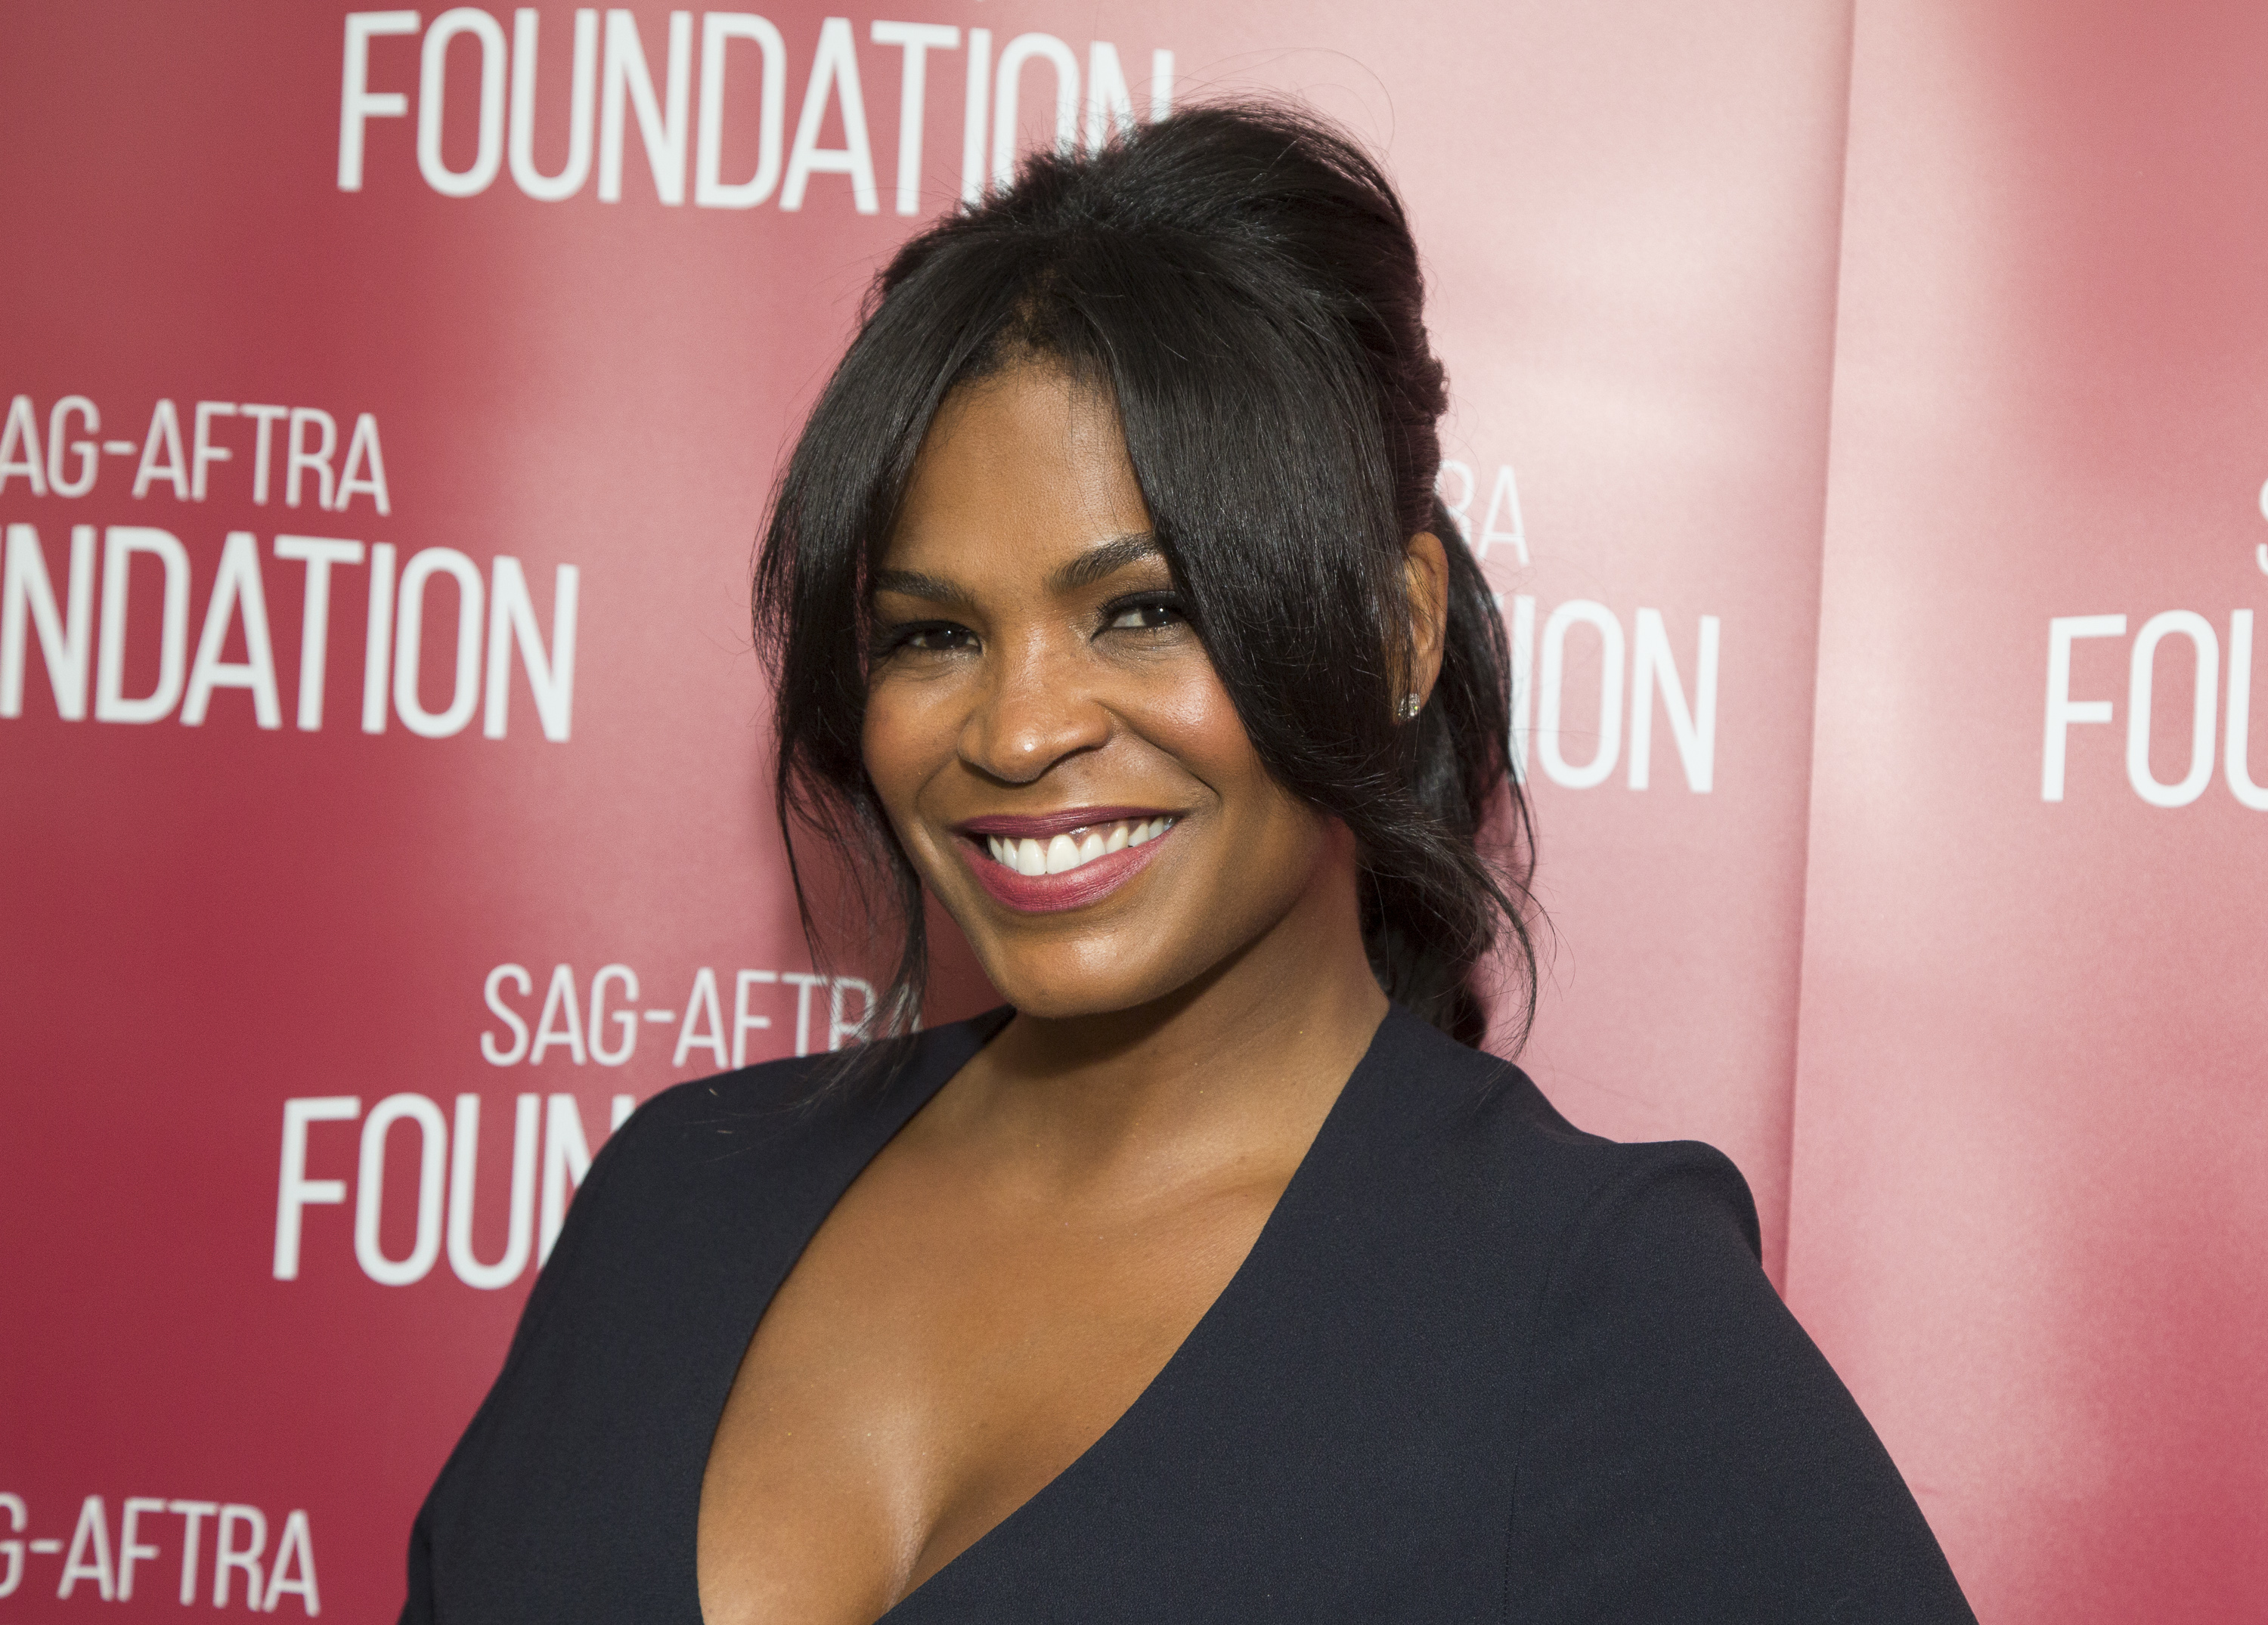 SAG-AFTRA Foundation Conversations With 'Nia Long'